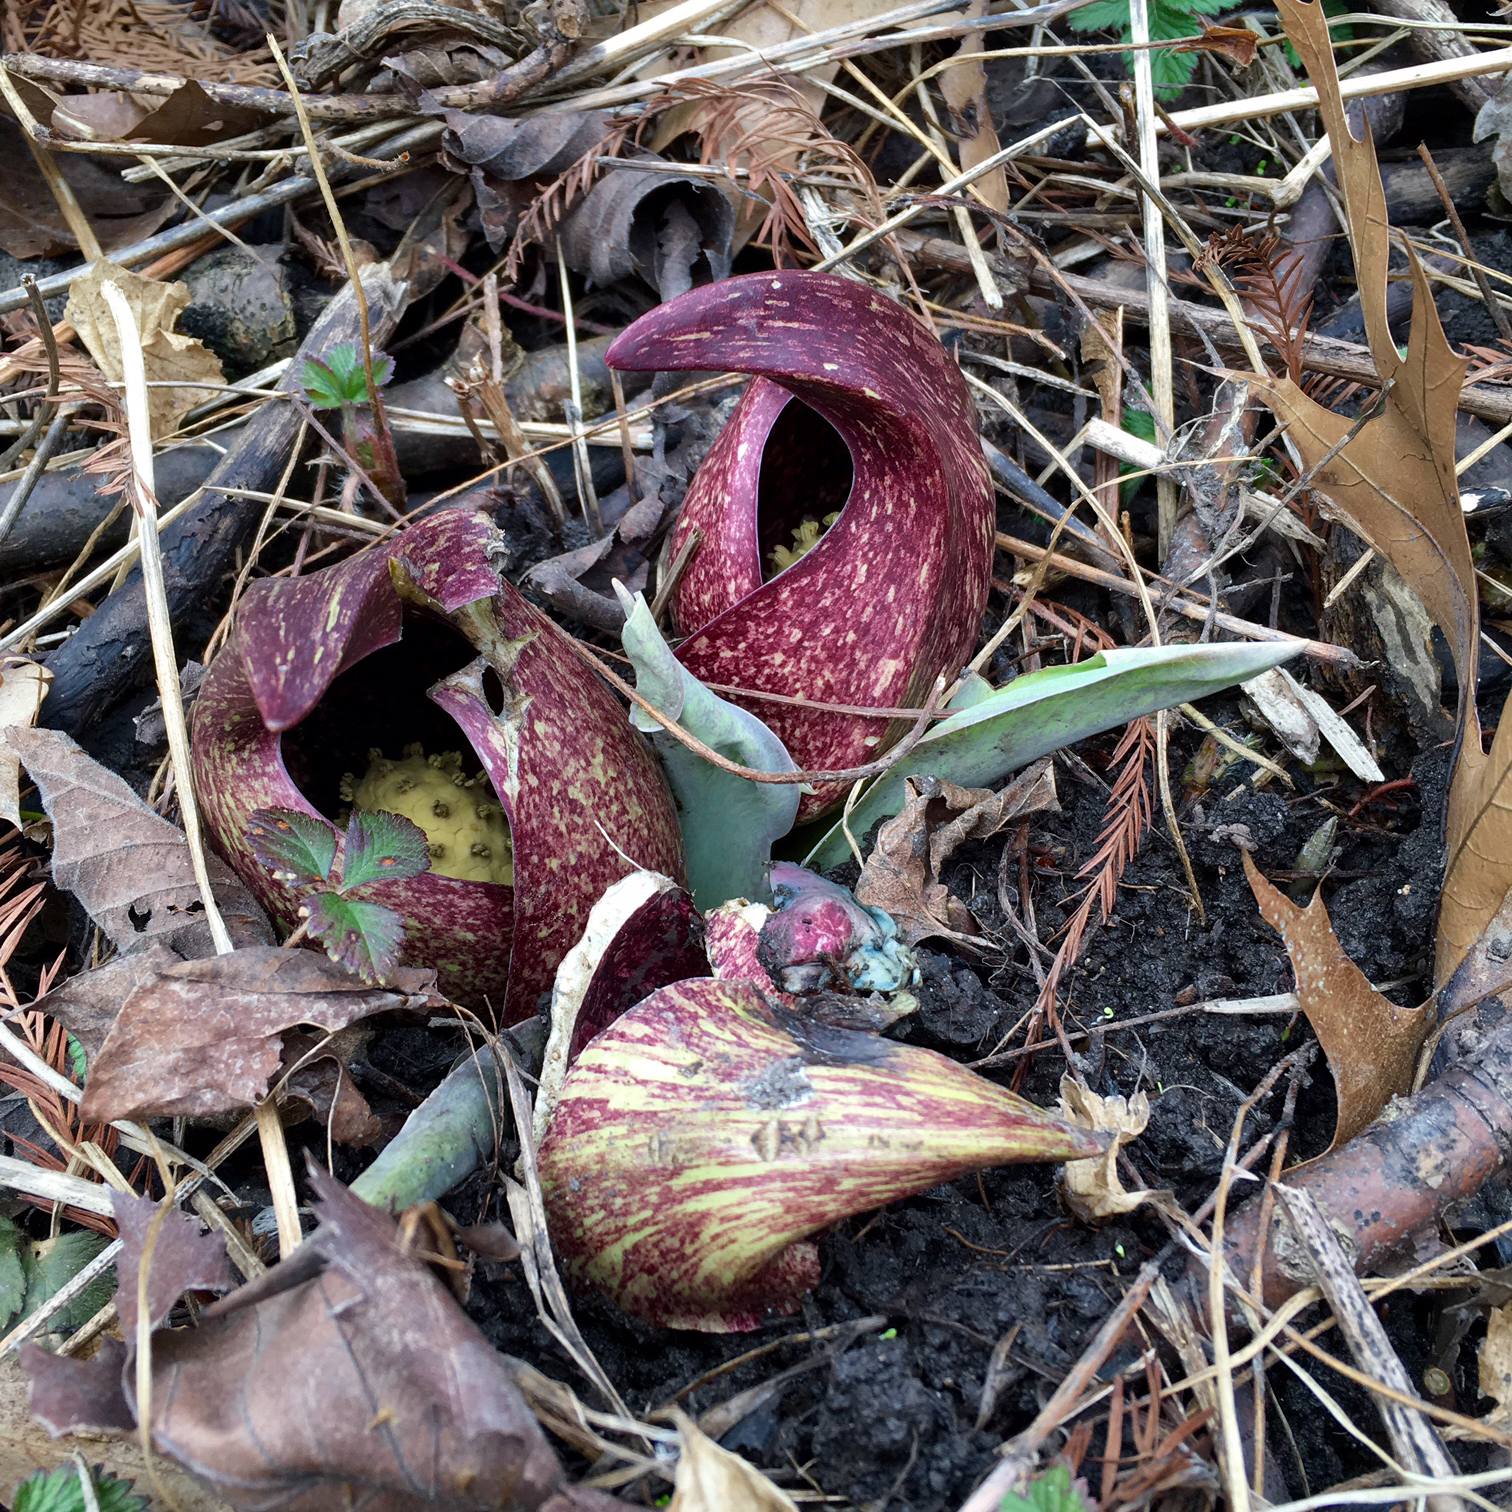 Skunk Cabbage: Gross and Cool Herald of Spring in Chicago